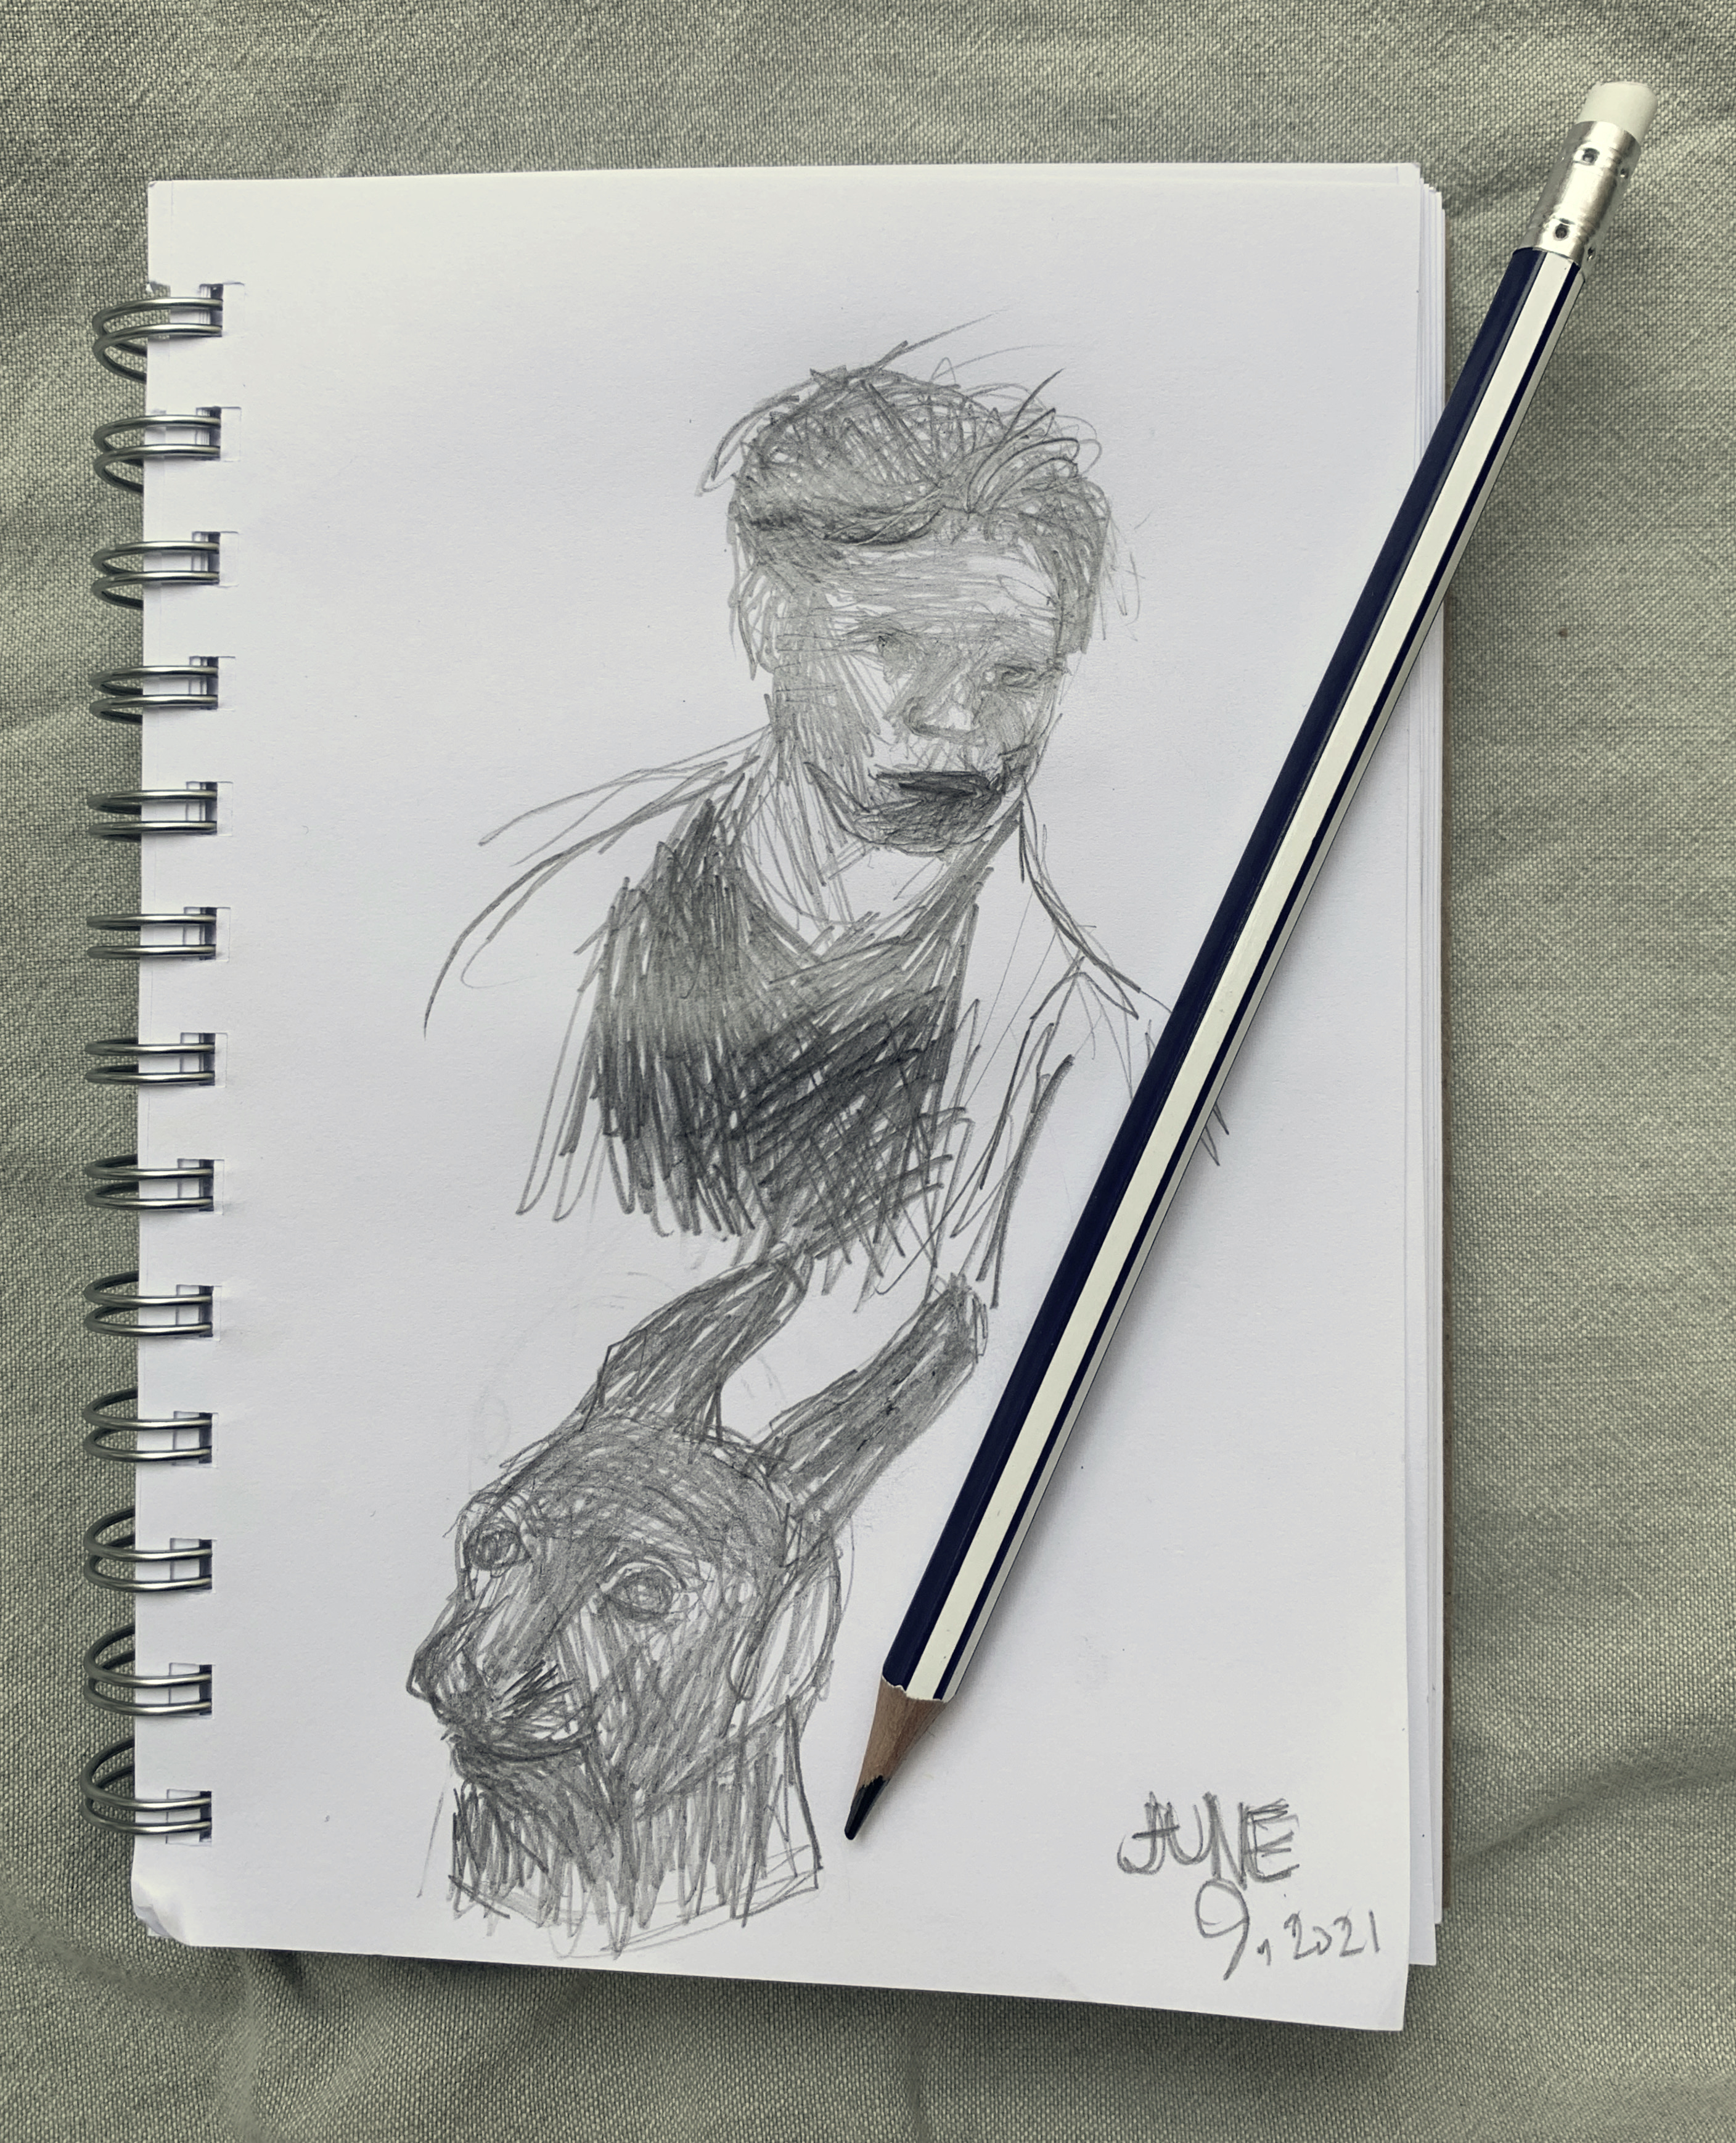 Page in a sketchbook with sketches of a human figure and a rabbit